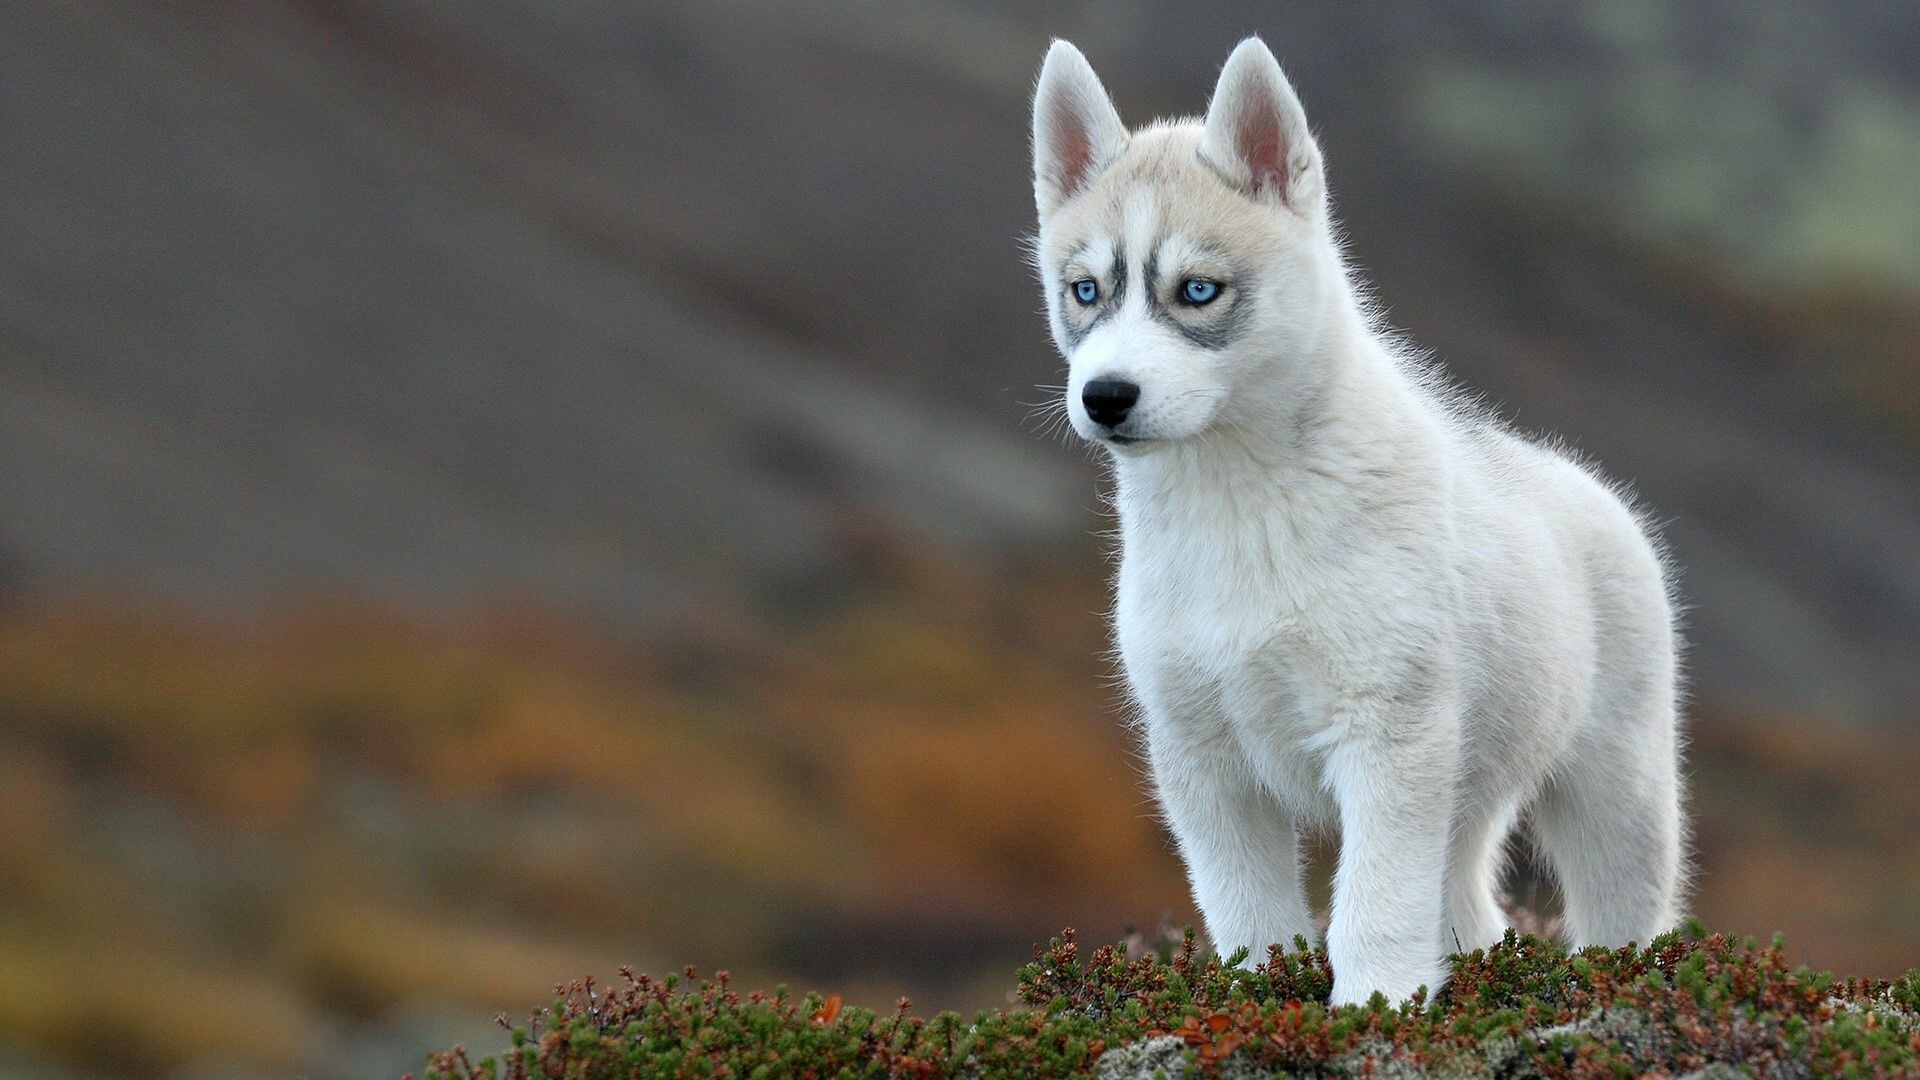 Siberian Husky: Frequently used as sled dogs by competitive and recreational mushers. 1920x1080 Full HD Background.